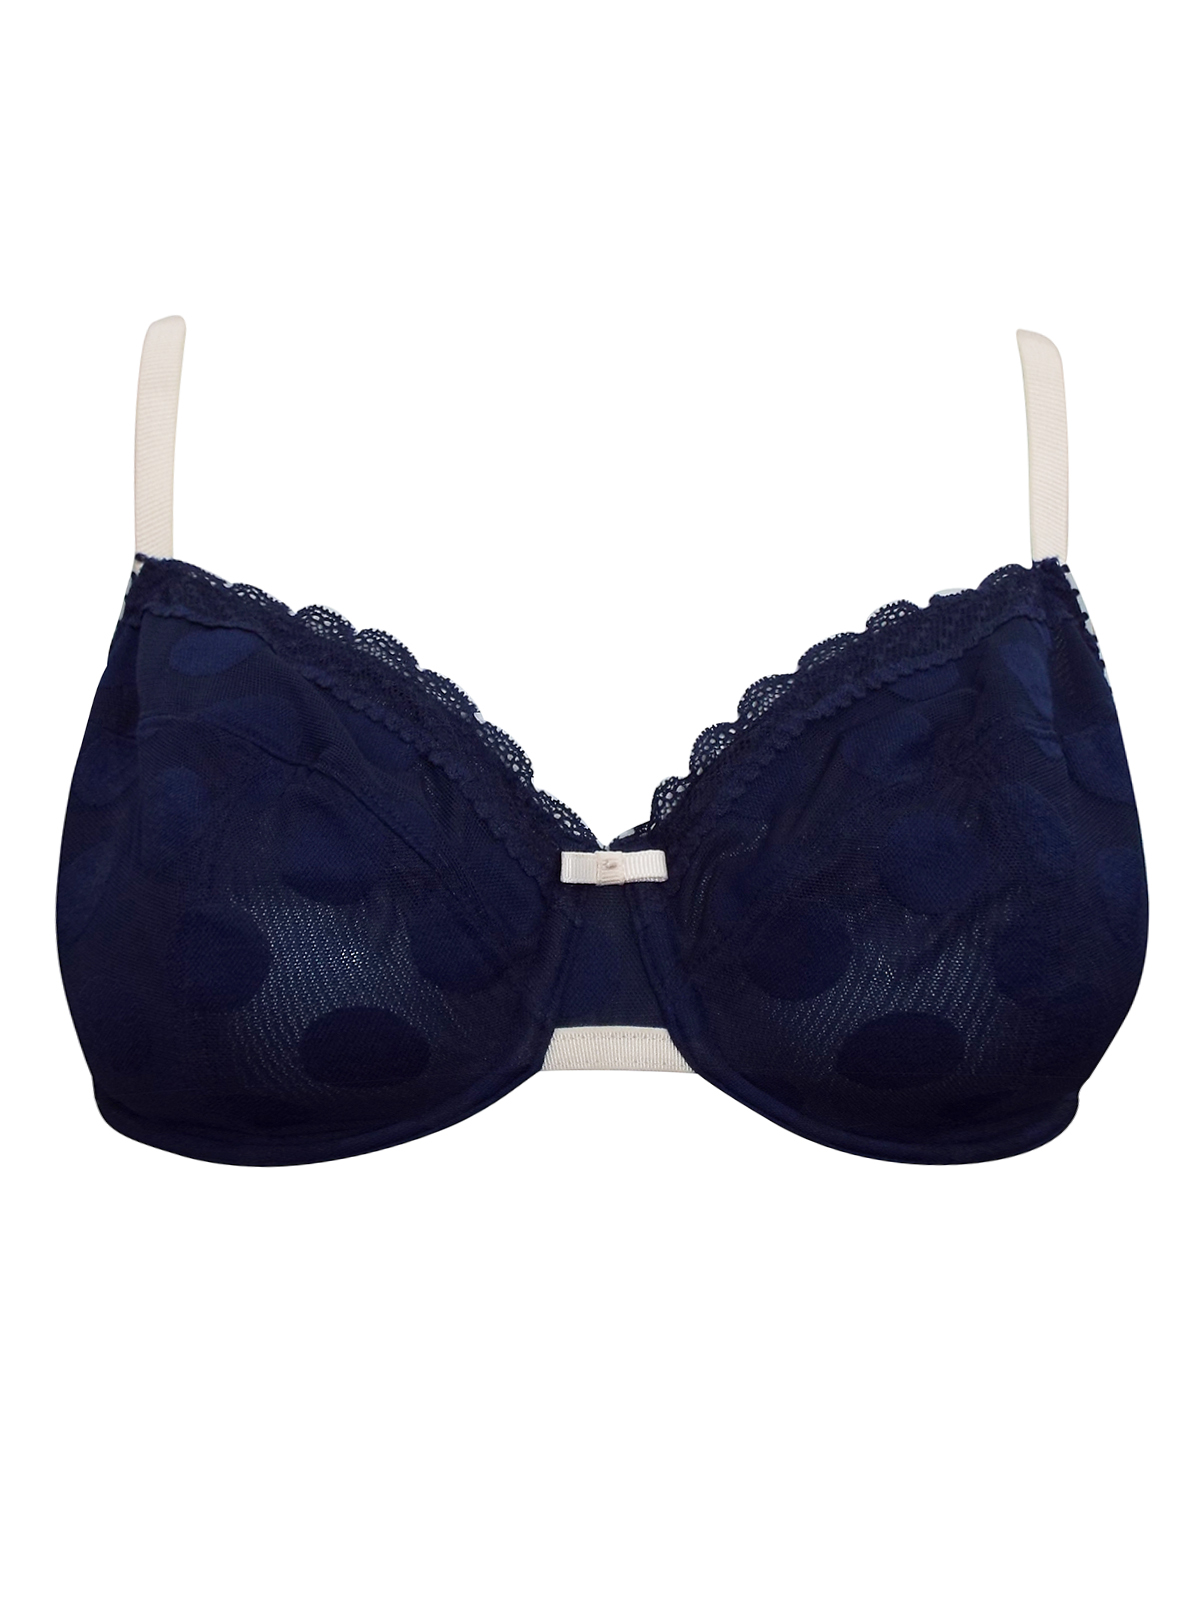 Marks and Spencer - - M&5 NAVY Spotted Non-Padded Full Cup Bra - Size ...